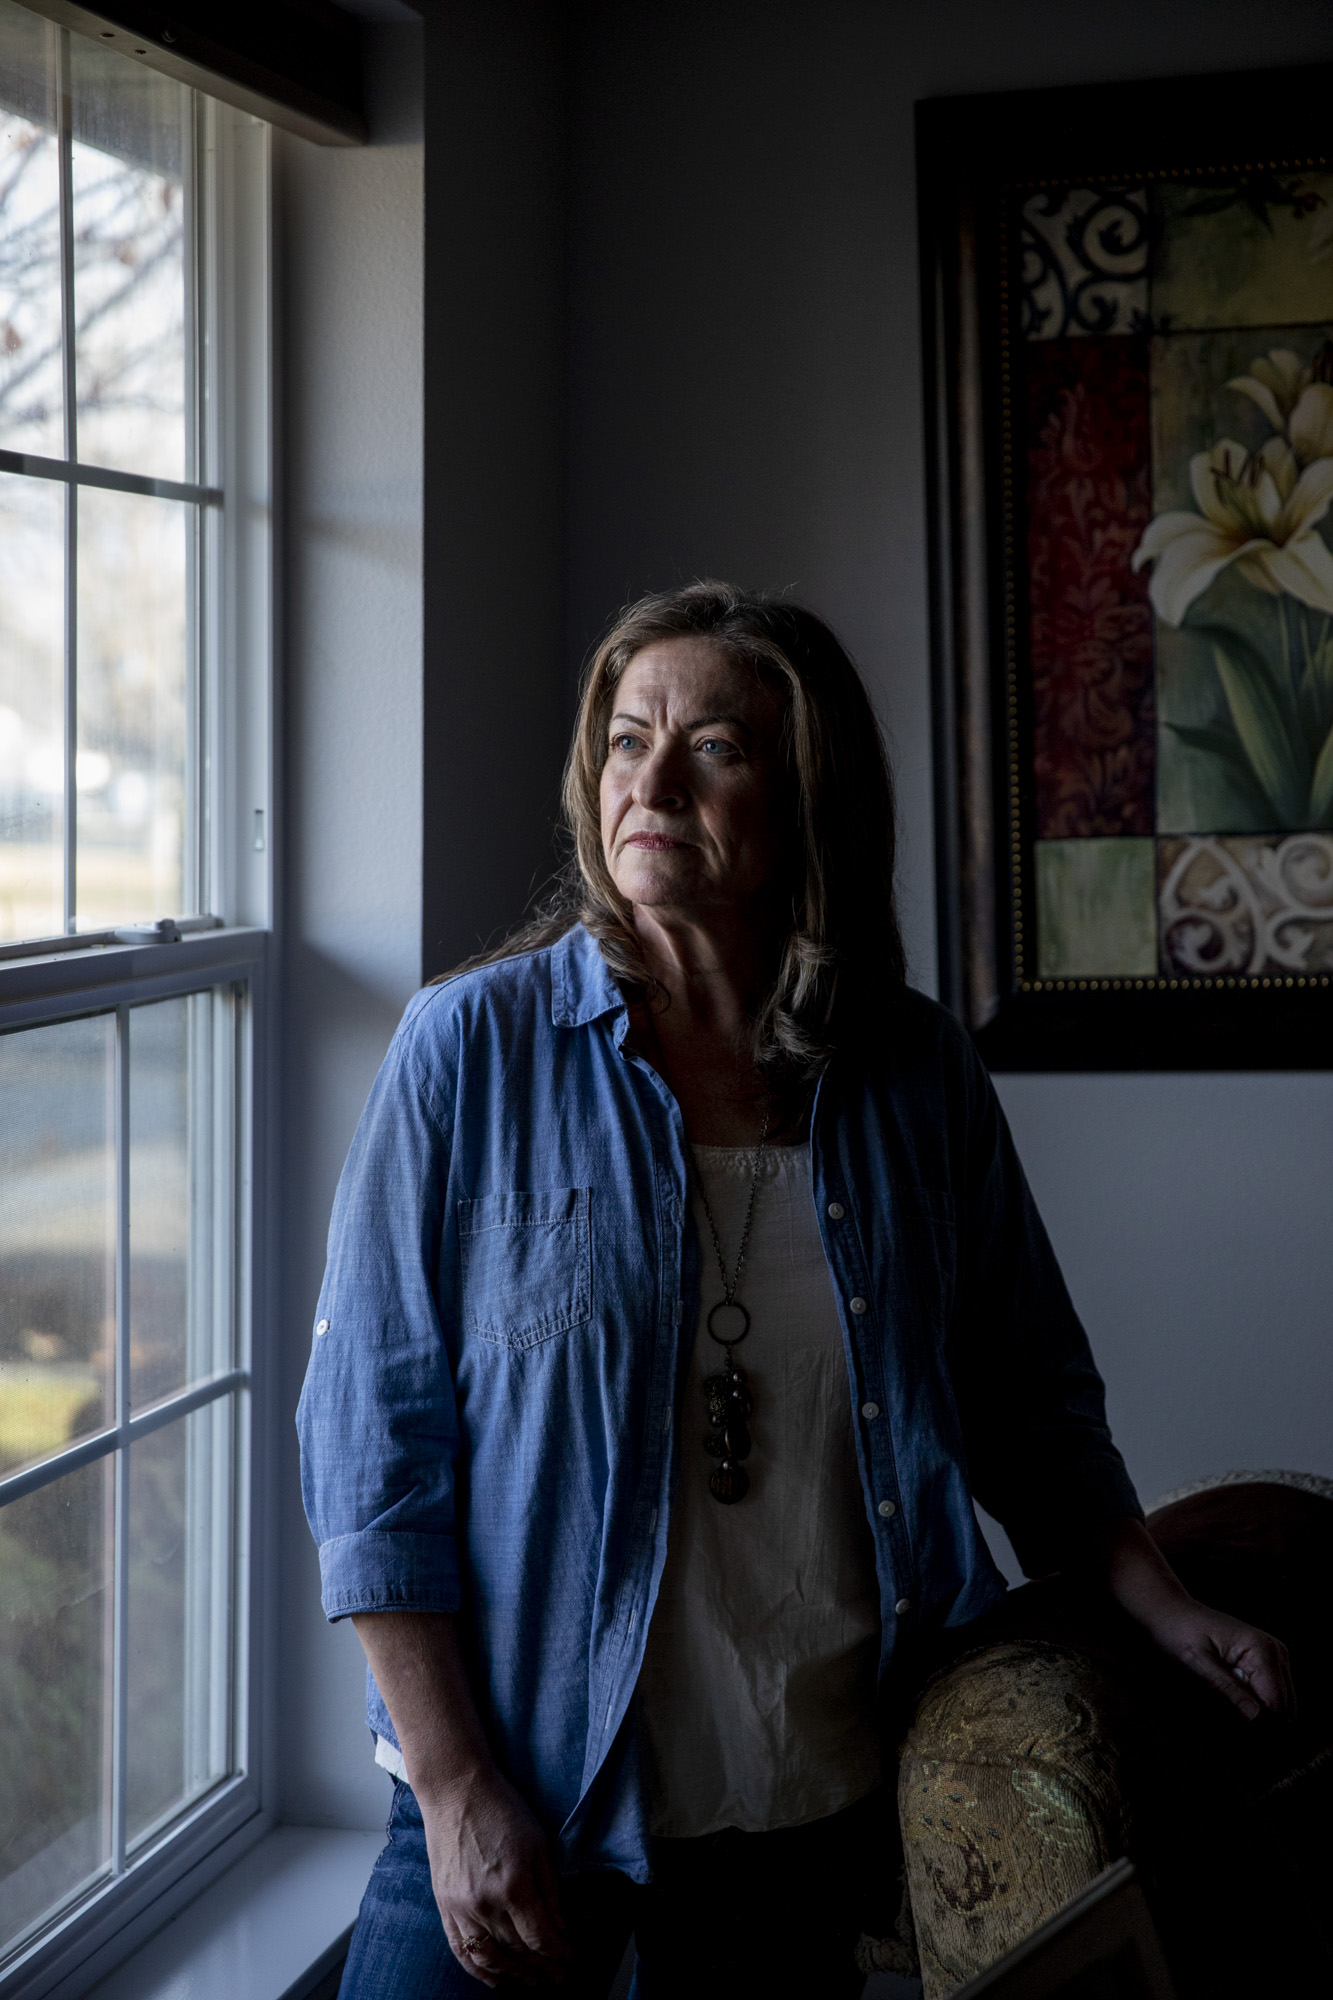 Penny Quist stands by a window inside her home